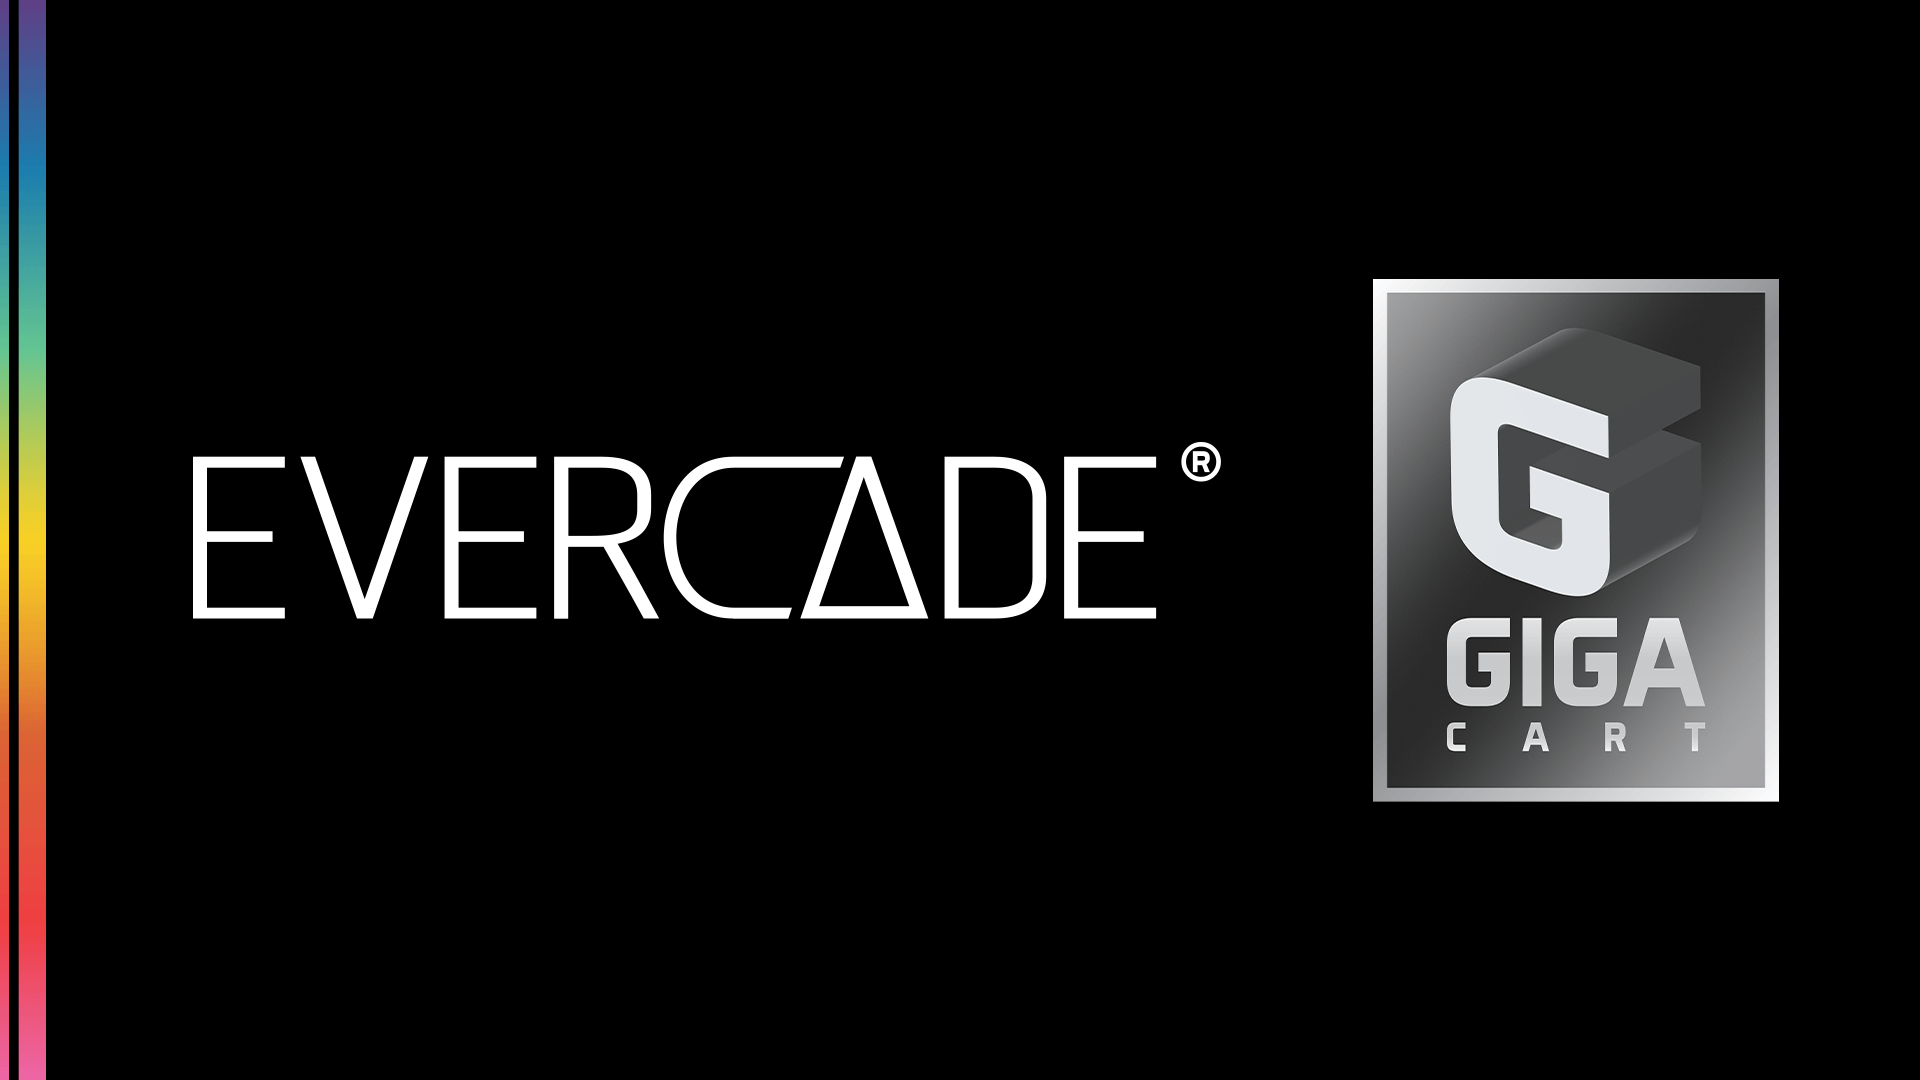 Ready go to ... https://evercade.co.uk/introducing-giga-cart/ [ Introducing Giga Cart - Evercade]